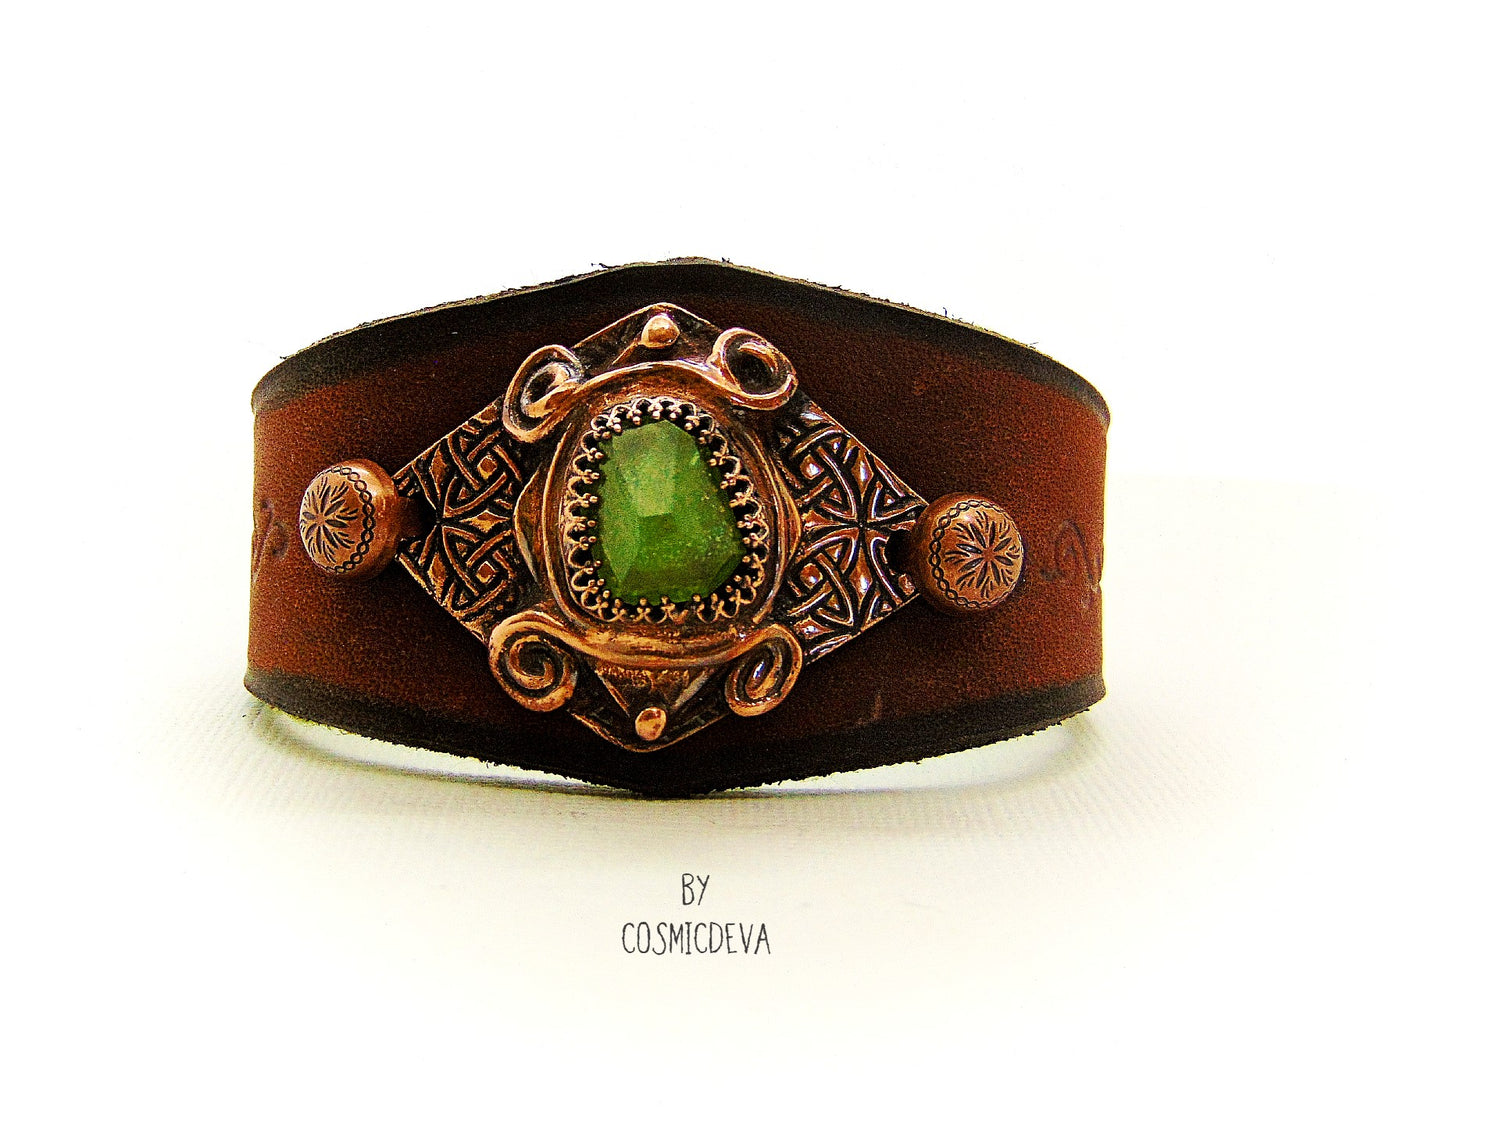 One of a kind handcrafted leather cuff bracelet made of hand cut earthy brown dyed veg tan leather. The focal point is a high quality natural raw green peridot gemstone in a bezel setting on a Celtic design textured solid copper base. The inside of the leather bracelet is lined with olive green felt for your comfort.